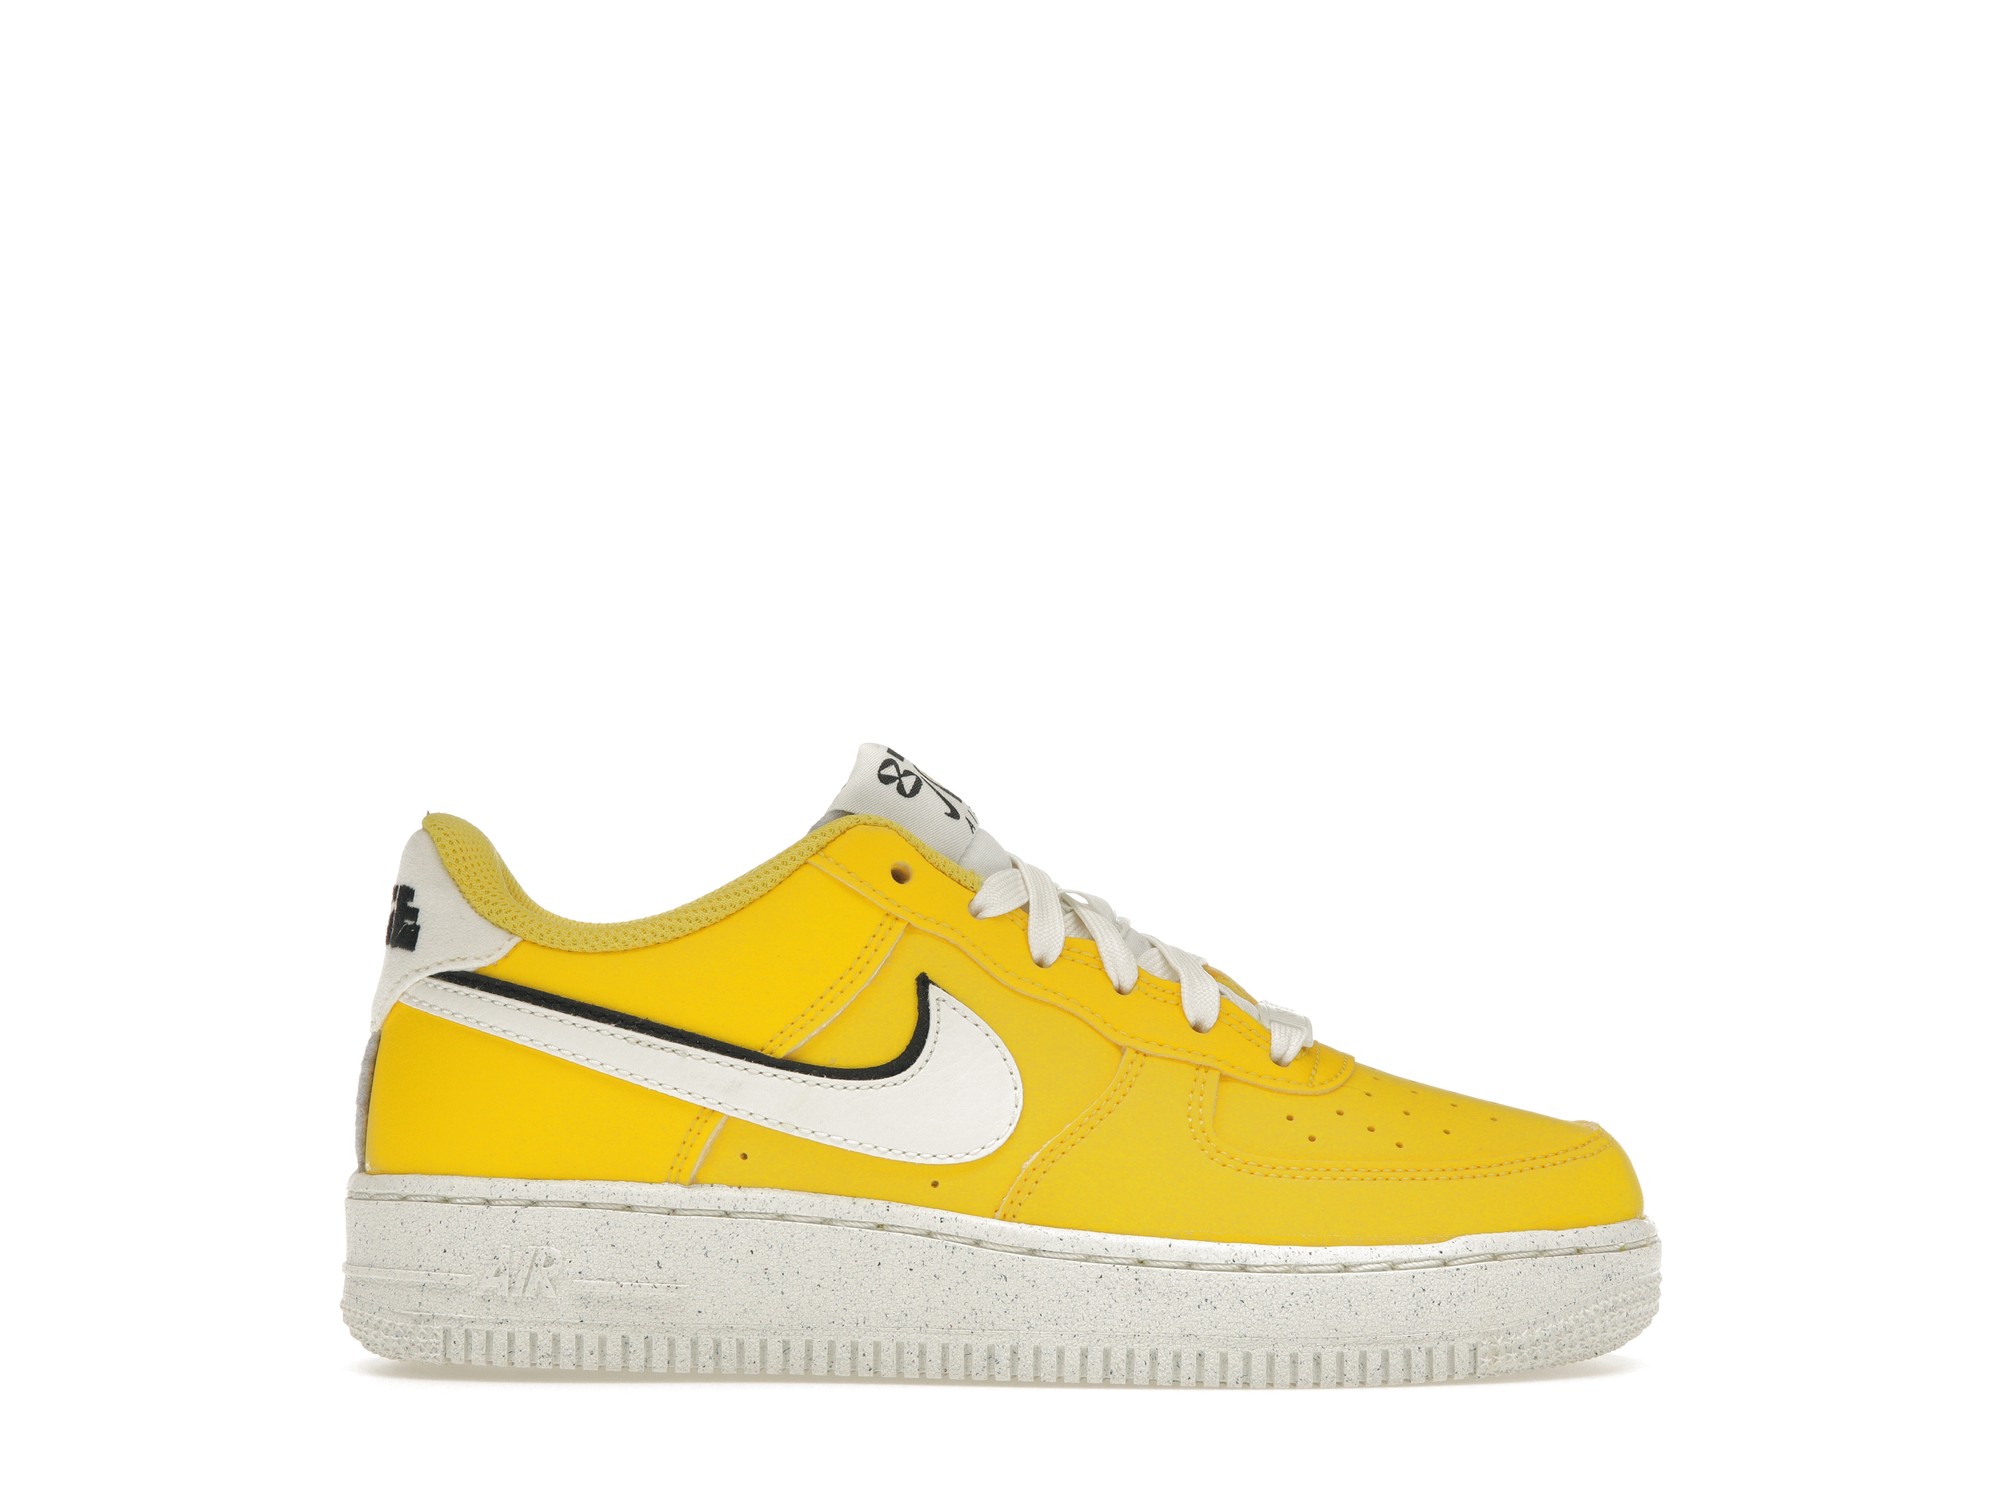 Nike Air Force 1 Low LV8 82 Tour Yellow (GS) Kids' - DQ0359-700 - US